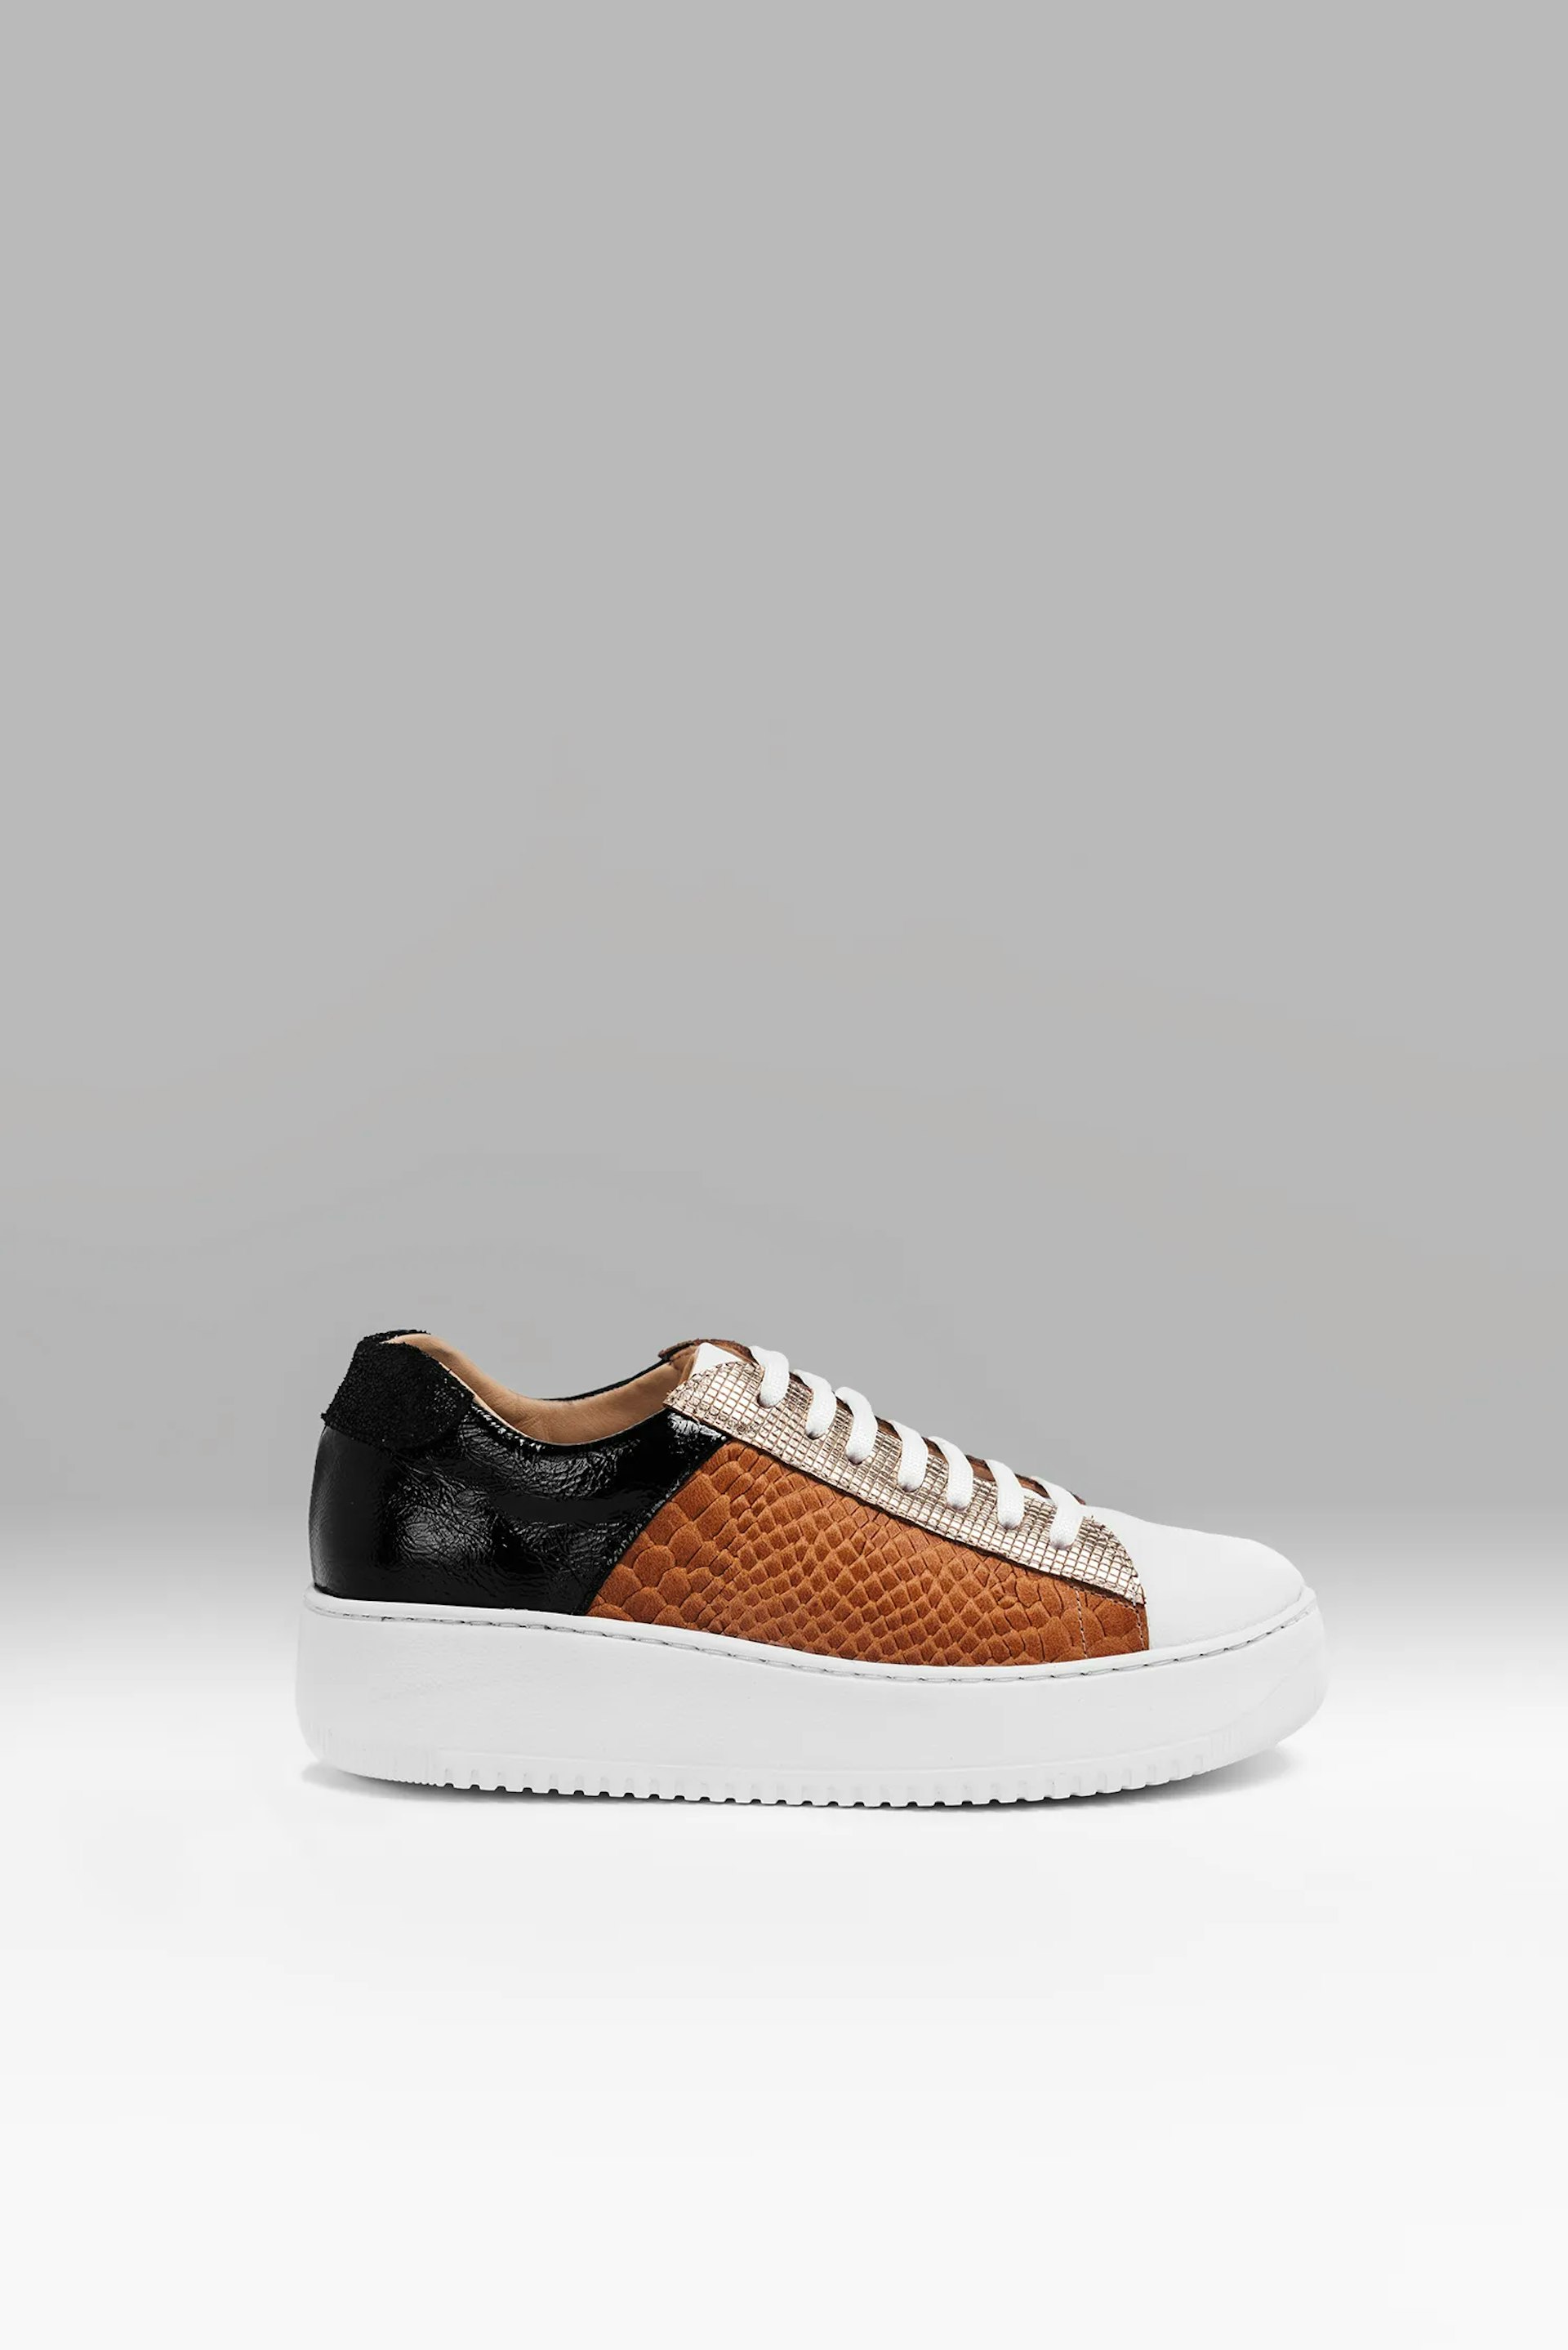 Sneakers Vitti Murcia. Handcrafted low-top sneaker made from high-quality leather, with a design that combines different teHandcrafted low-top sneaker made from high-quality leather, with a design that combines different te...